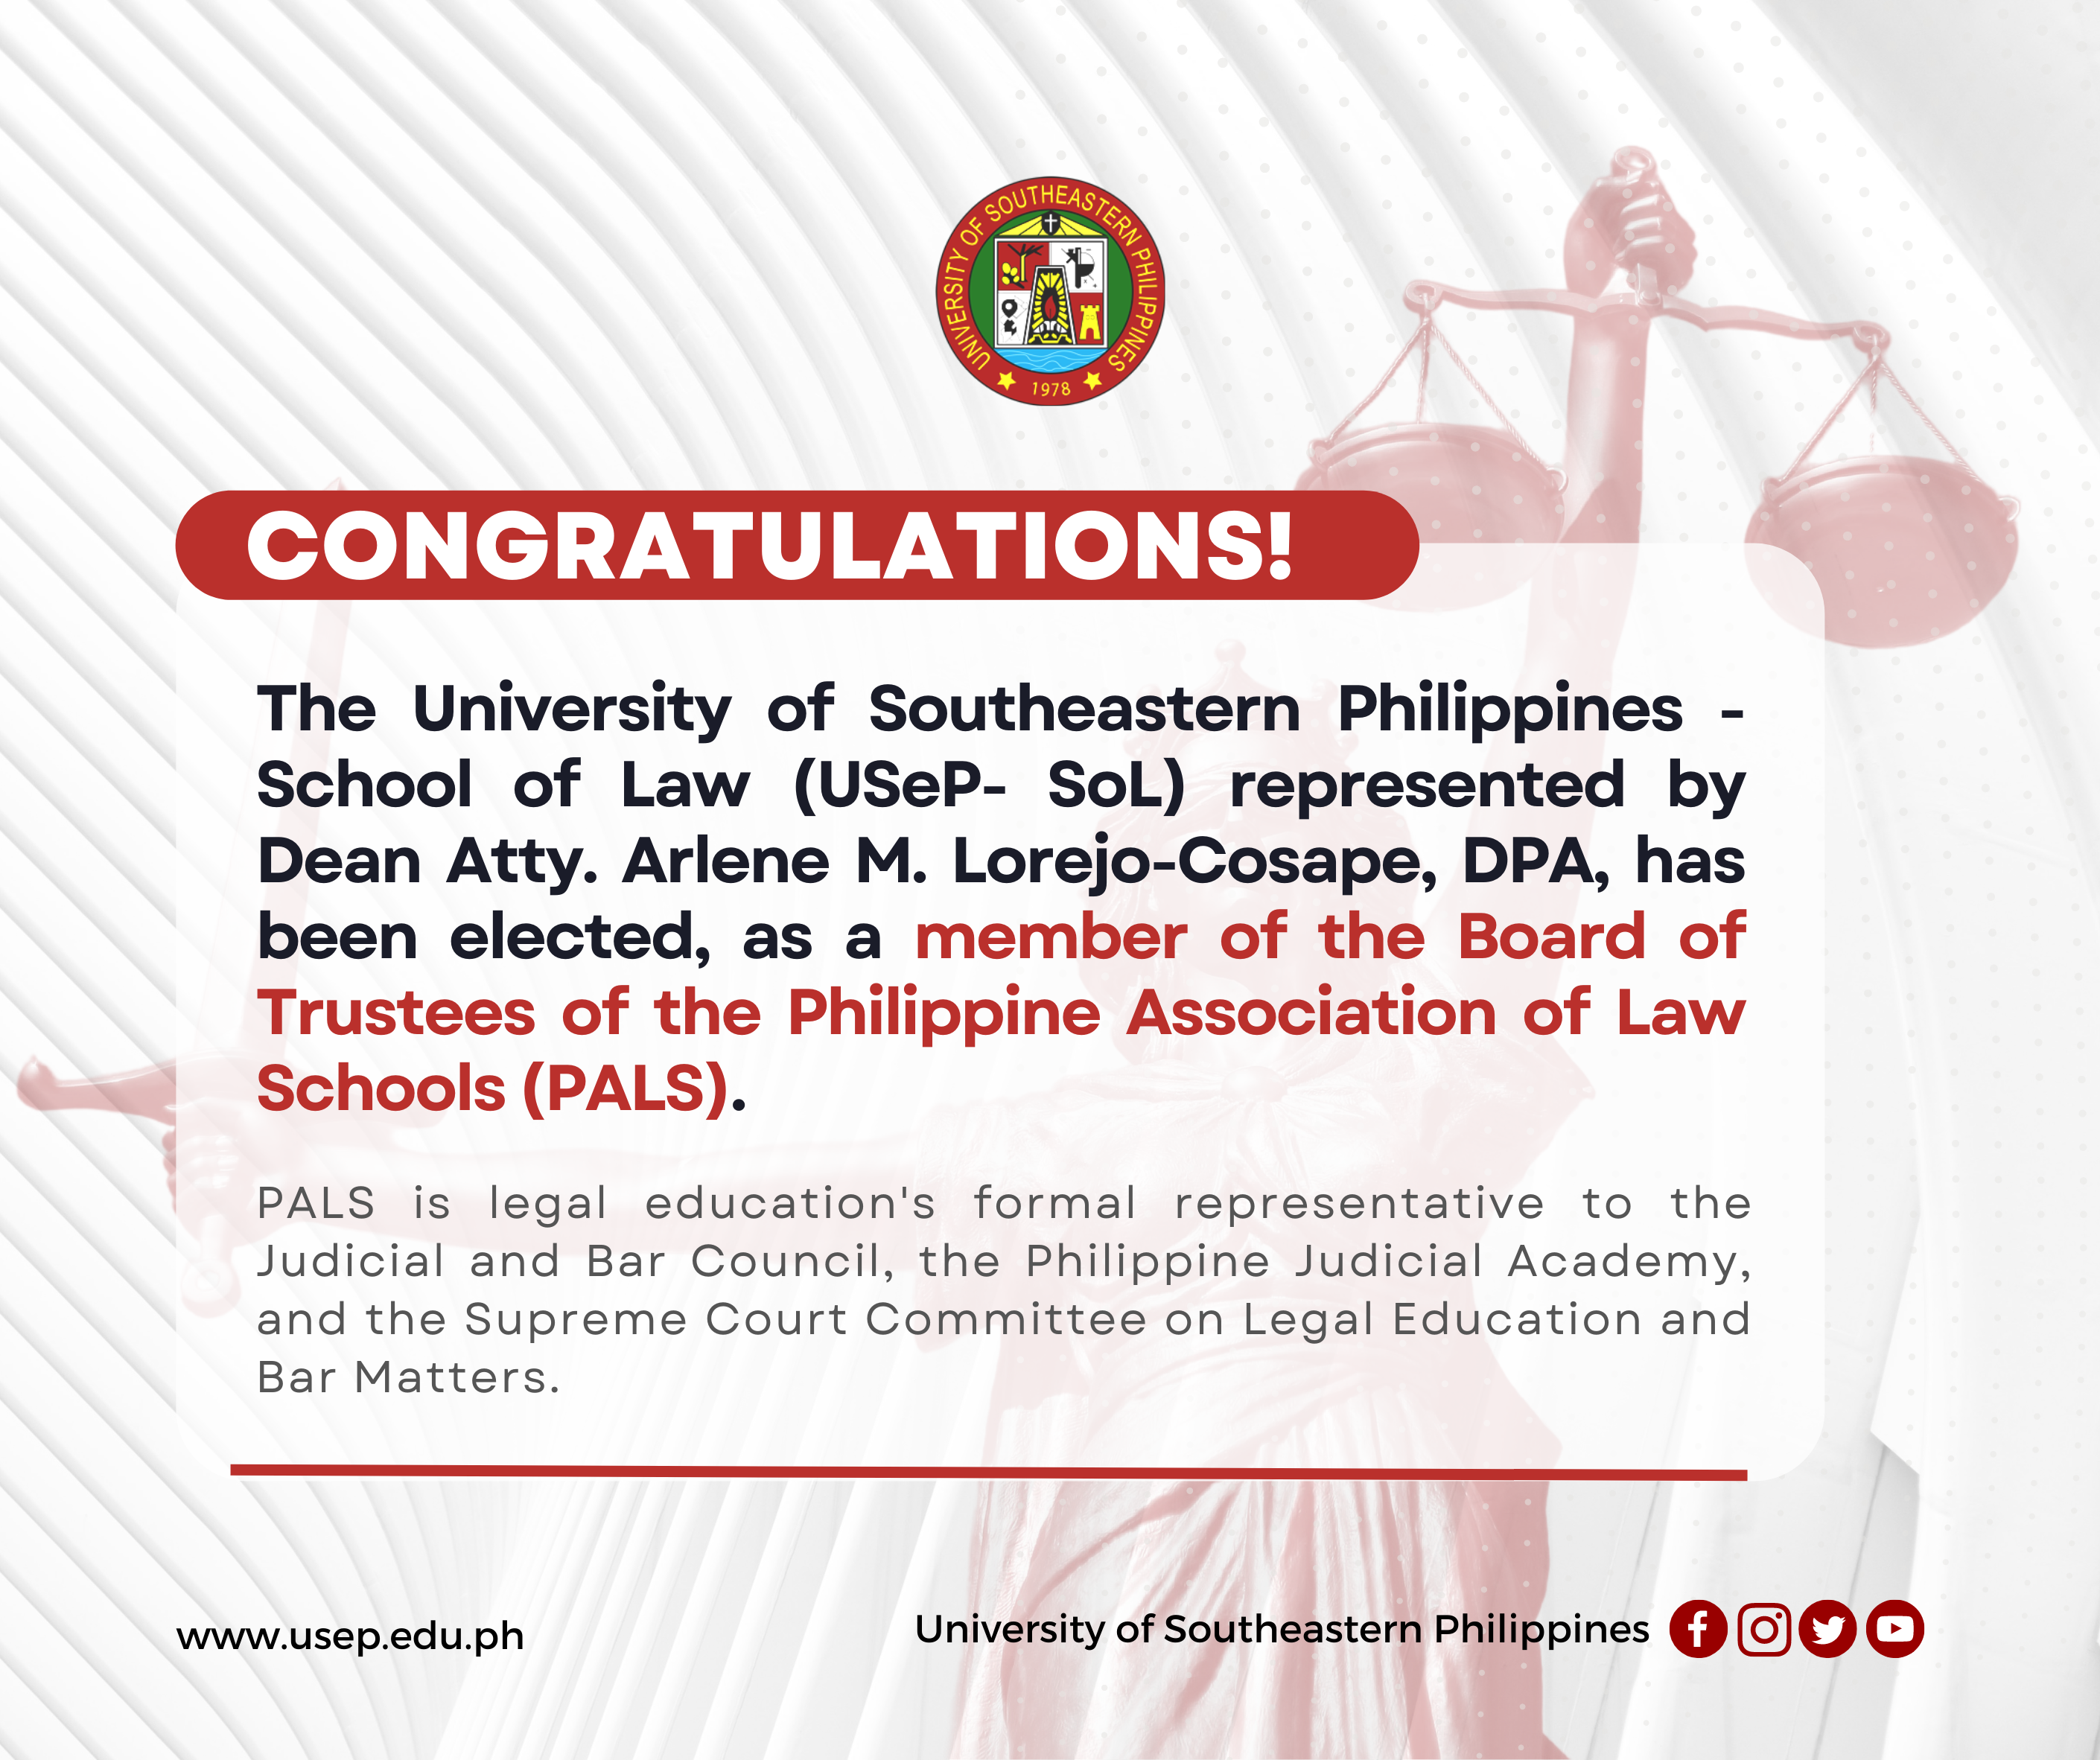 The University of Southeastern Philippines – School of Law (USeP-SoL) represented by Dean Atty. Arlene M. Lorejo-Cosape, DPA, has been elected as a member of the Board of Trustees of the Philippine Association of Law Schools (PALS).